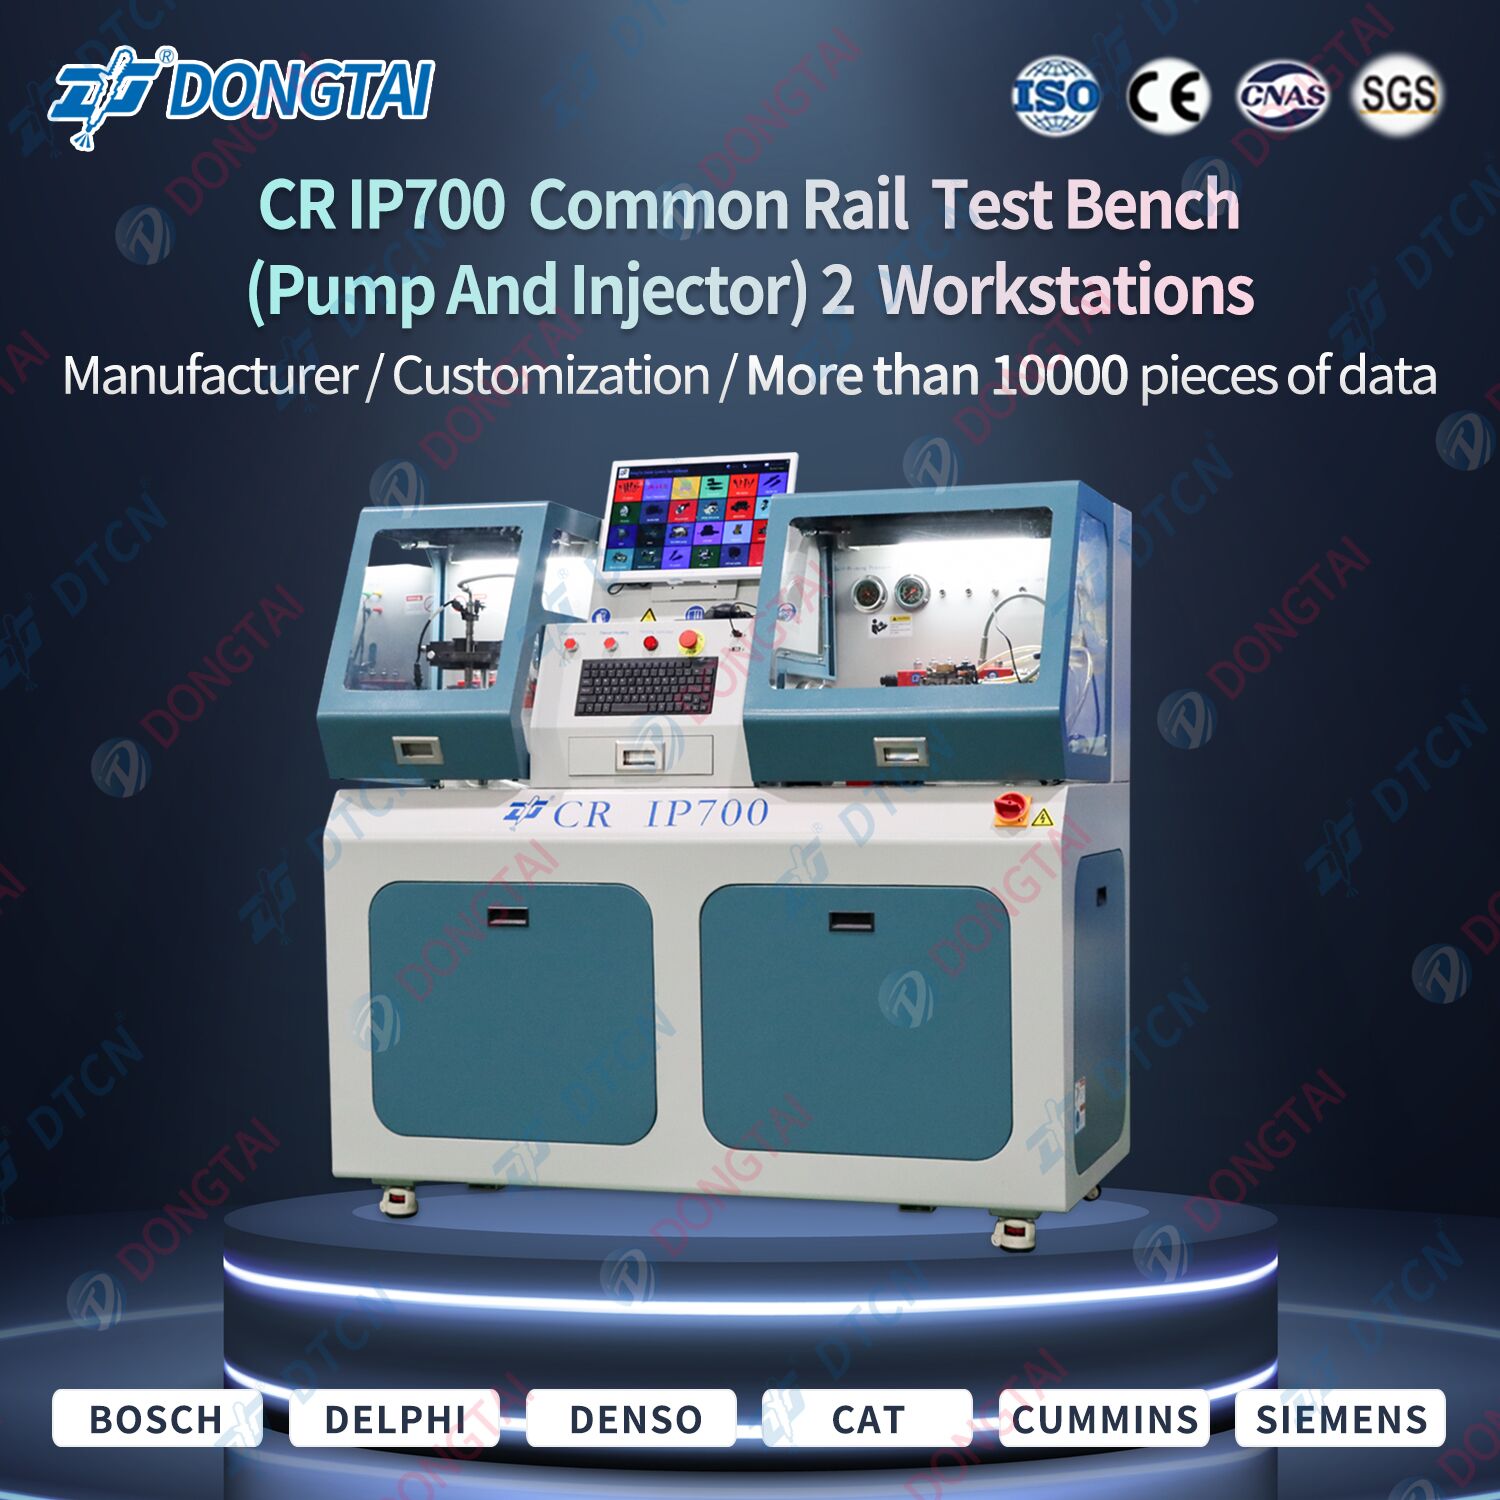 CR IP700 COMMON RAIL INJECTOR AND PUMP TEST BENCH Featured Image